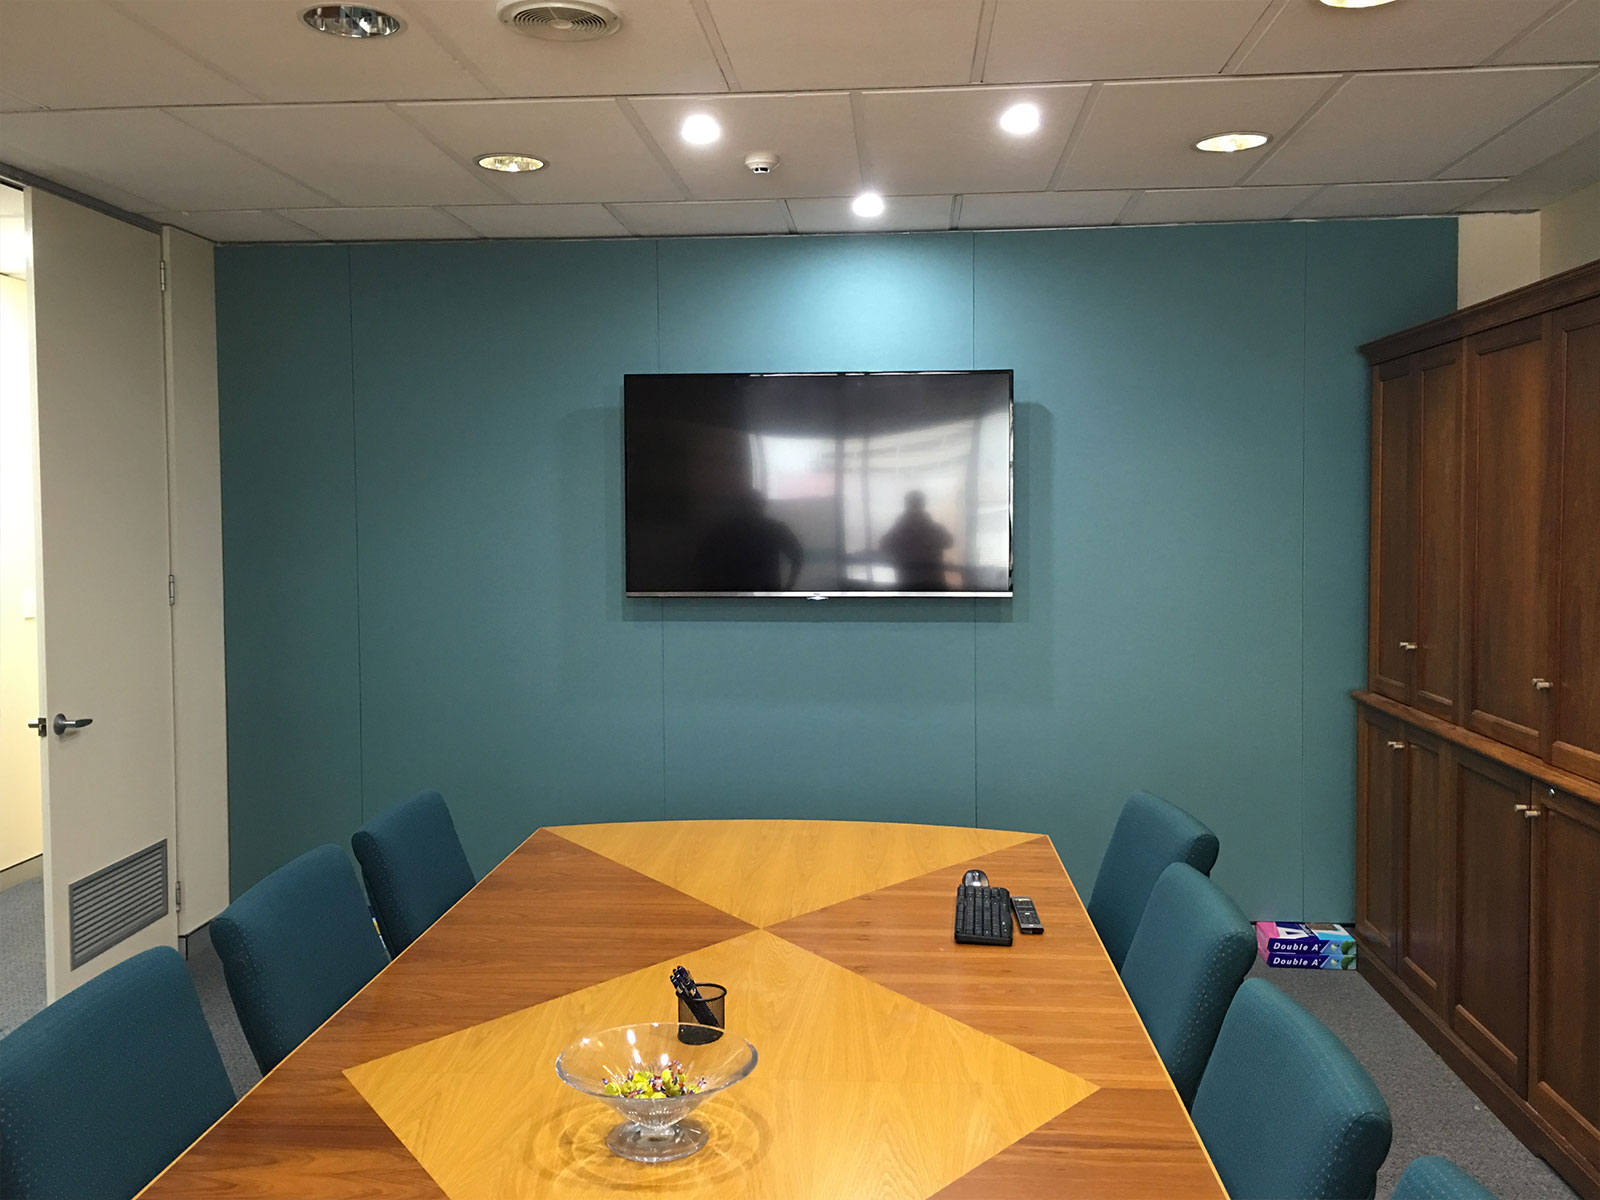 An office boardroom with soundproofing on the walls